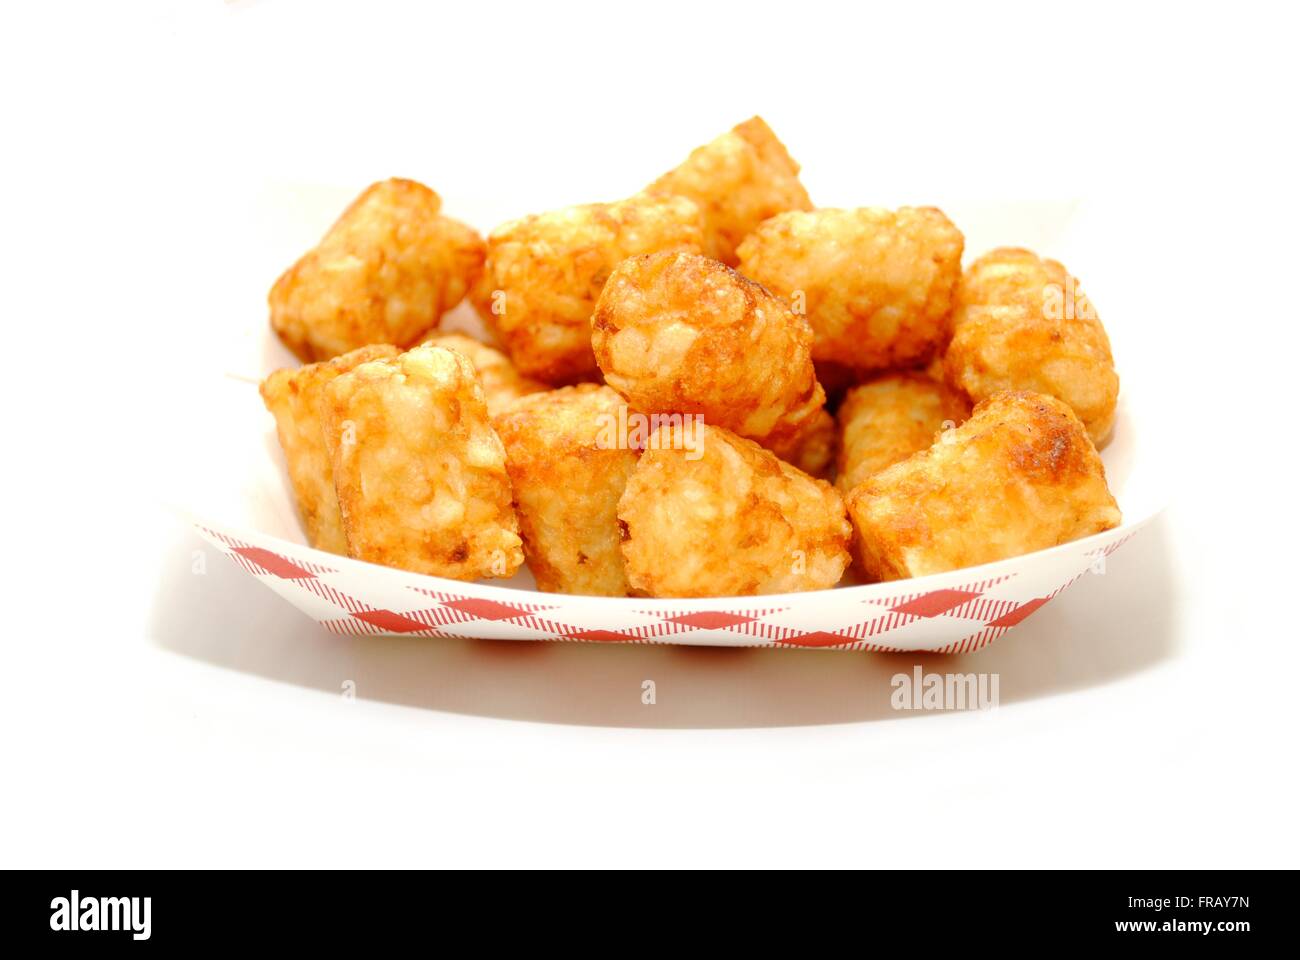 Food container hi-res stock photography and images - Alamy